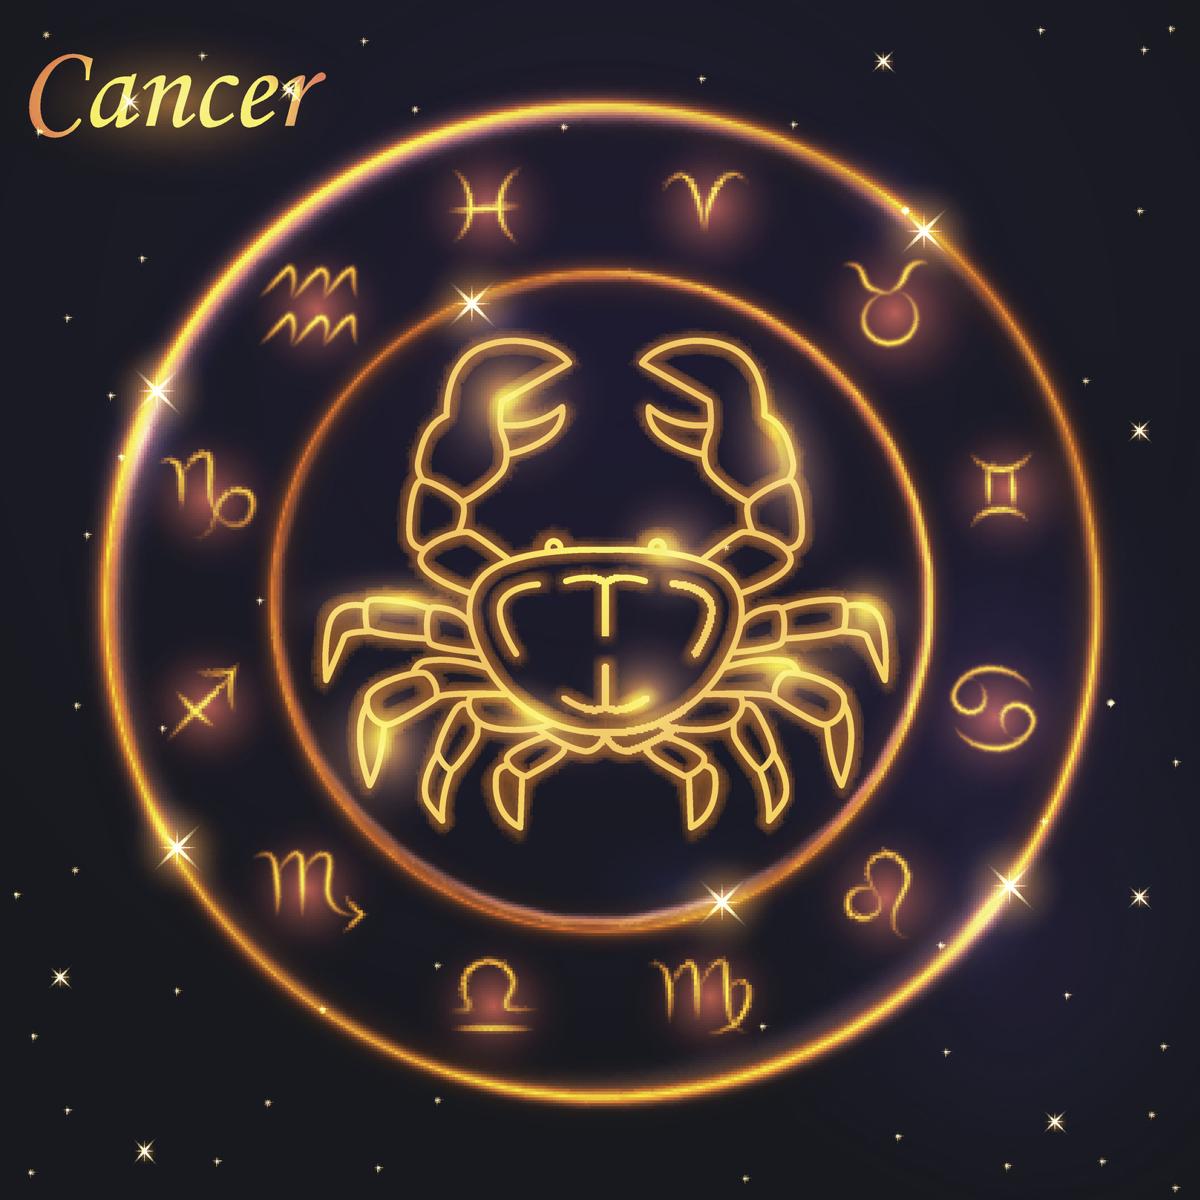 Cancer Astrology Sign Today : ☾HAPPY BIRTHDAY CANCER♋ - Oh My Stars ...